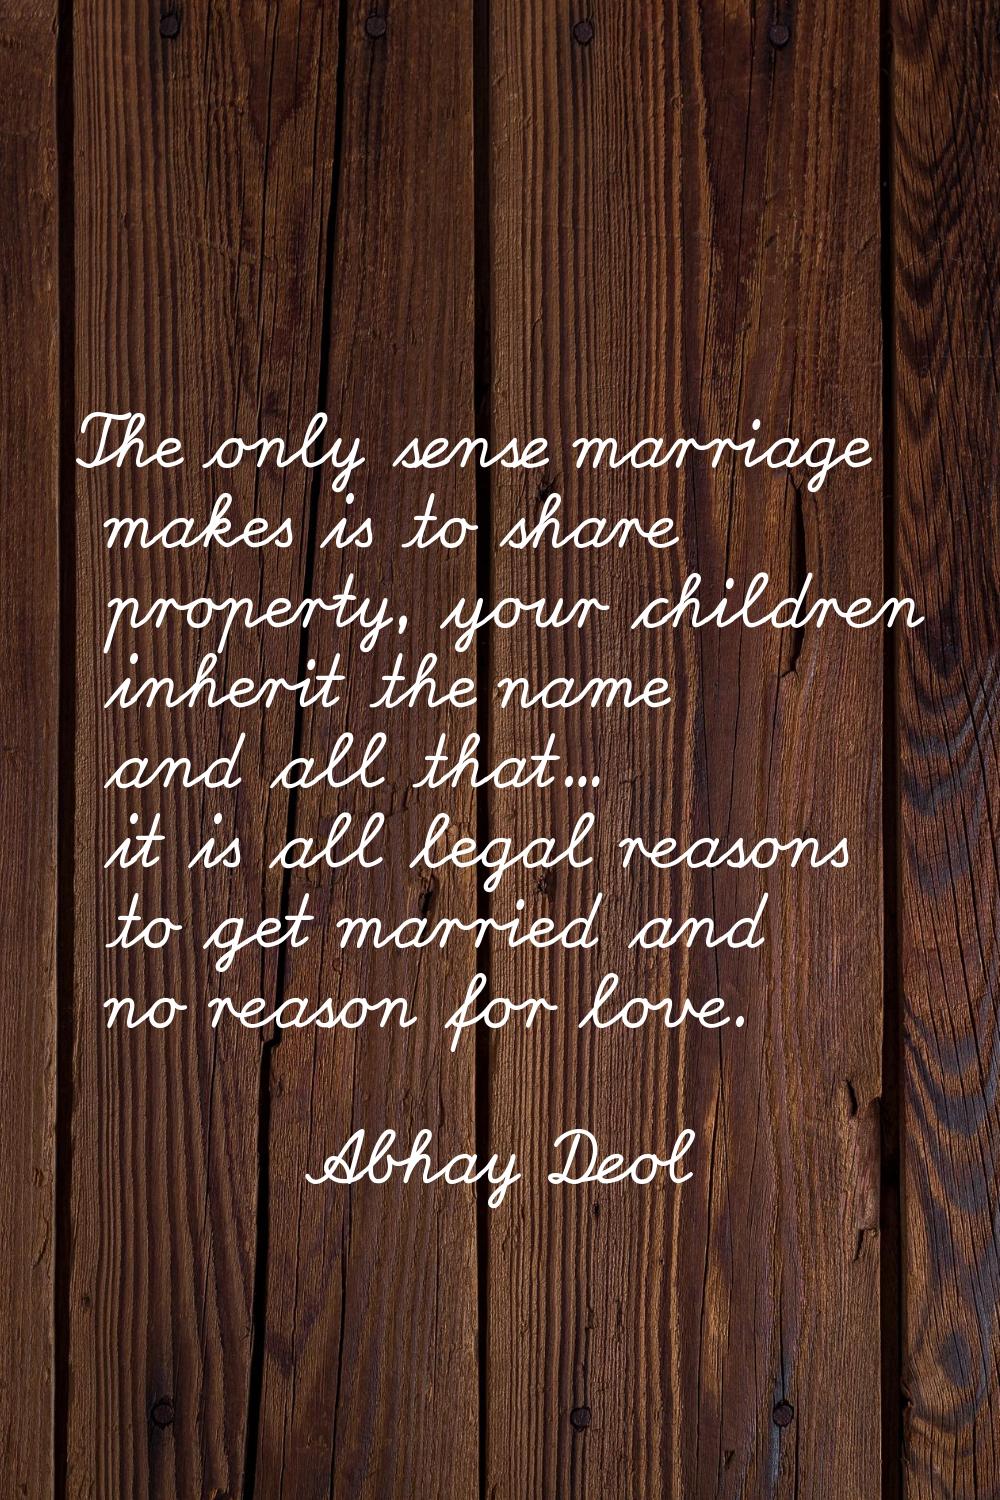 The only sense marriage makes is to share property, your children inherit the name and all that... 